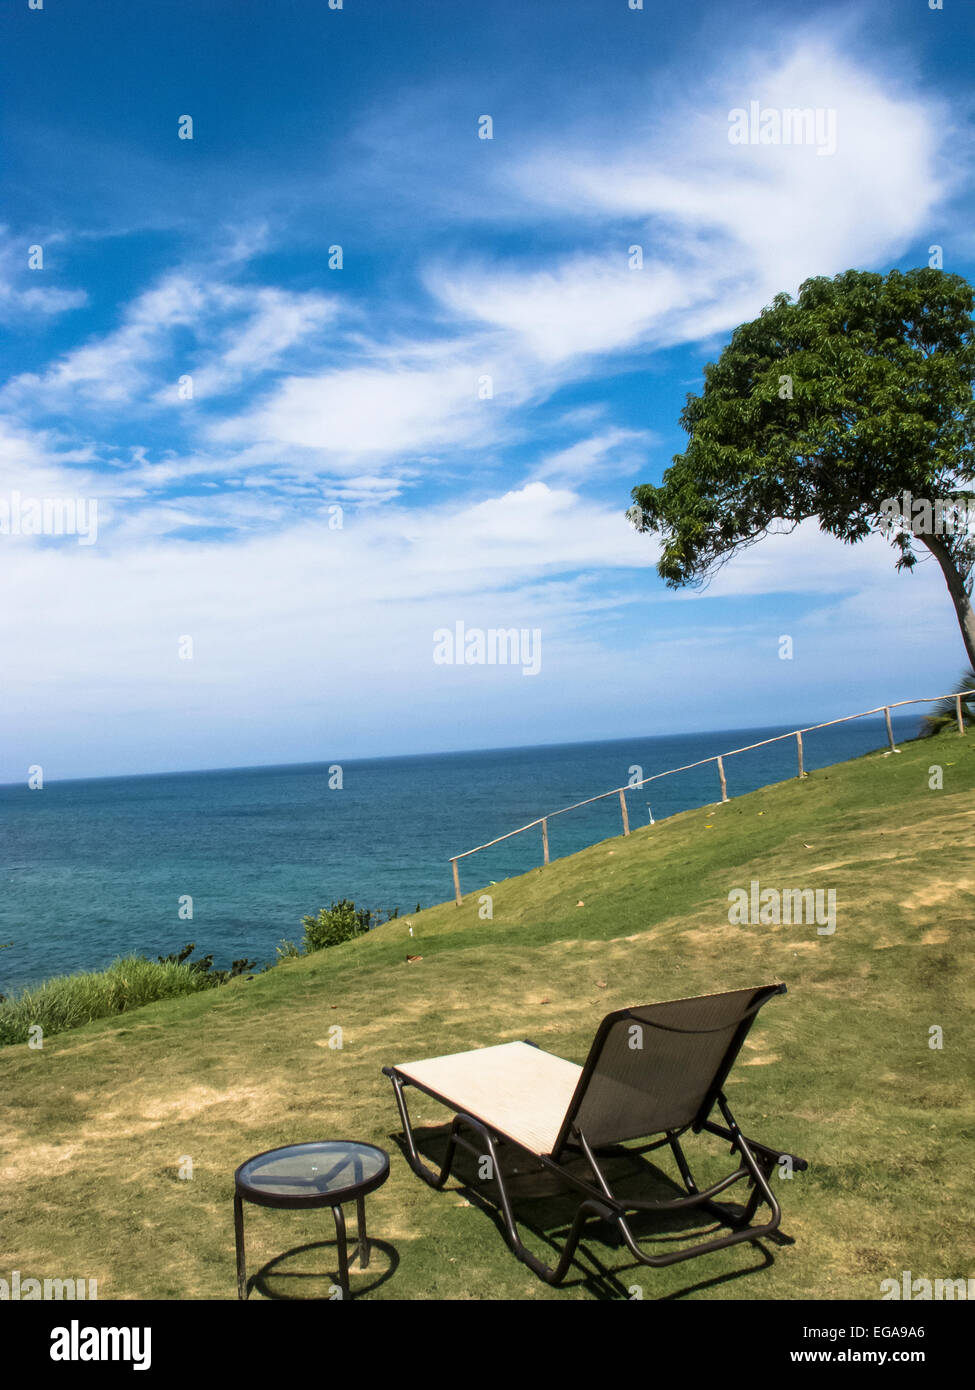 A chair and a table set on a mountain overlooking the Caribbean sea. Stock Photo